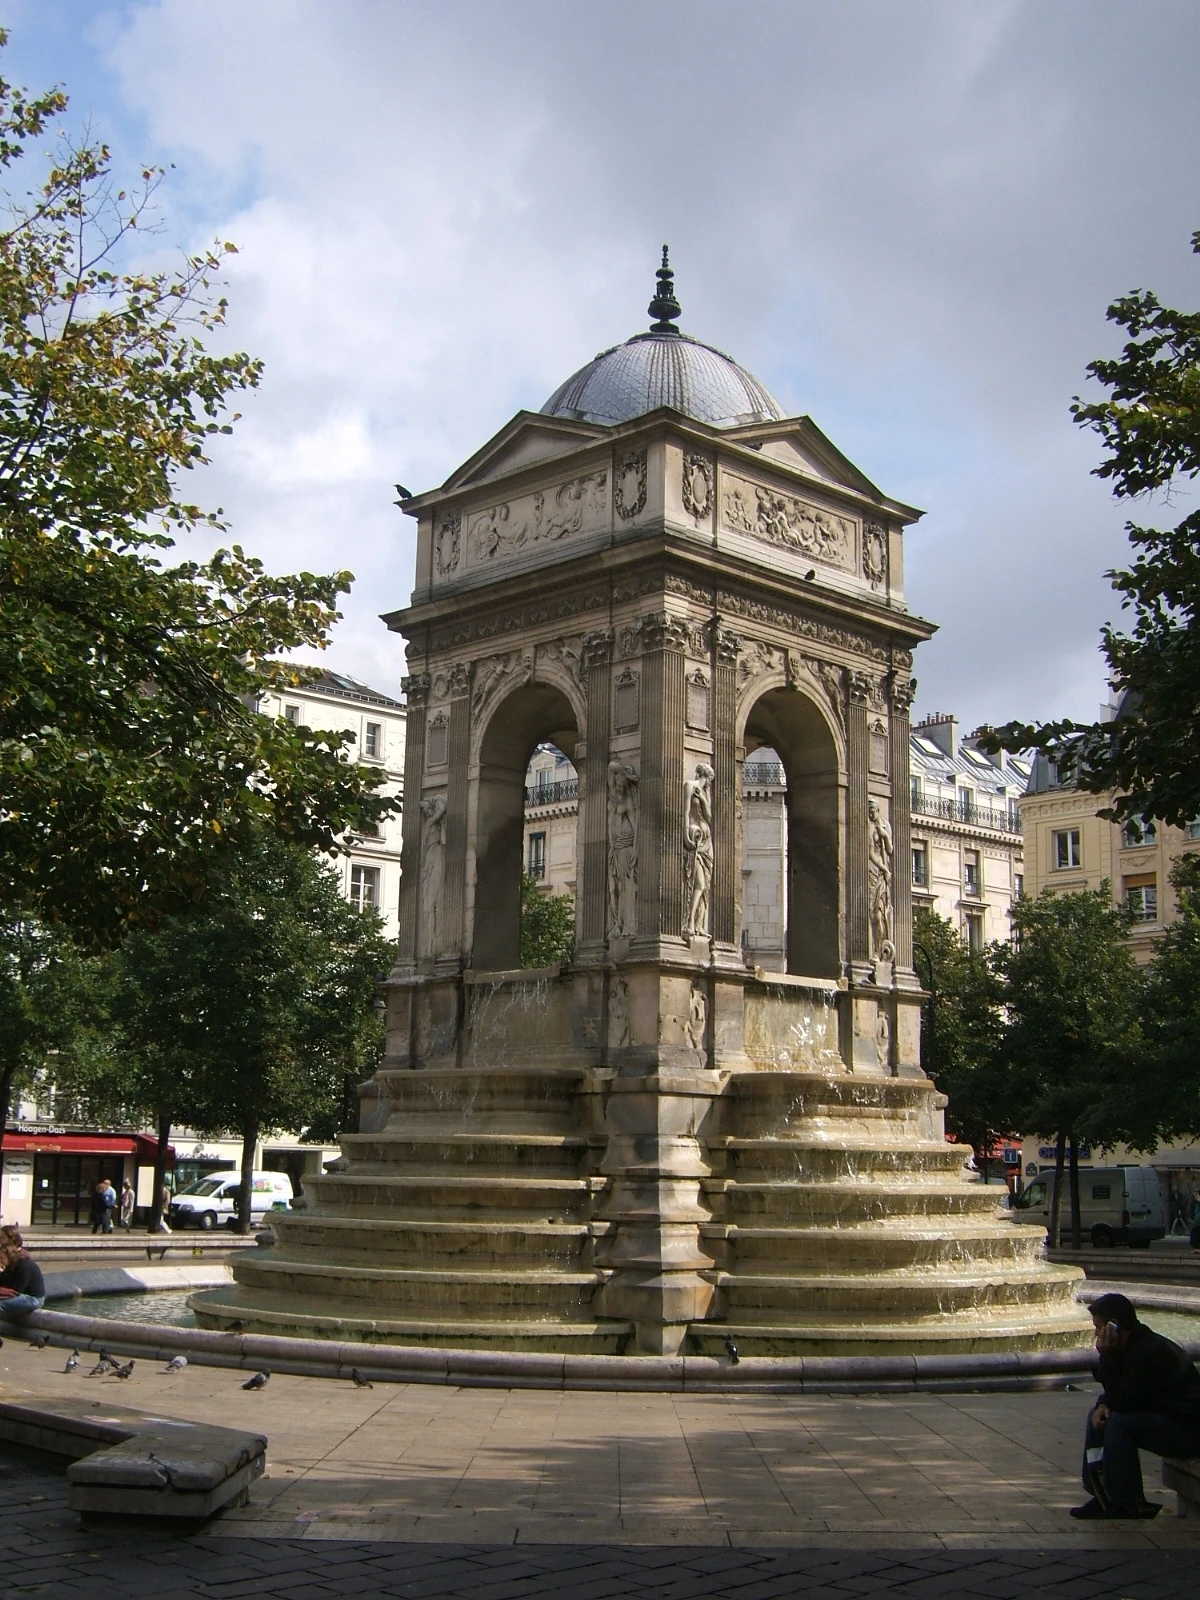 the Fountain of the Innocents today. Photo chosen by monsieurdefrance: Kmlz on en.wikipedia, CC BY-SA 2.5 <https://creativecommons.org/licenses/by-sa/2.5>, via Wikimedia Commons